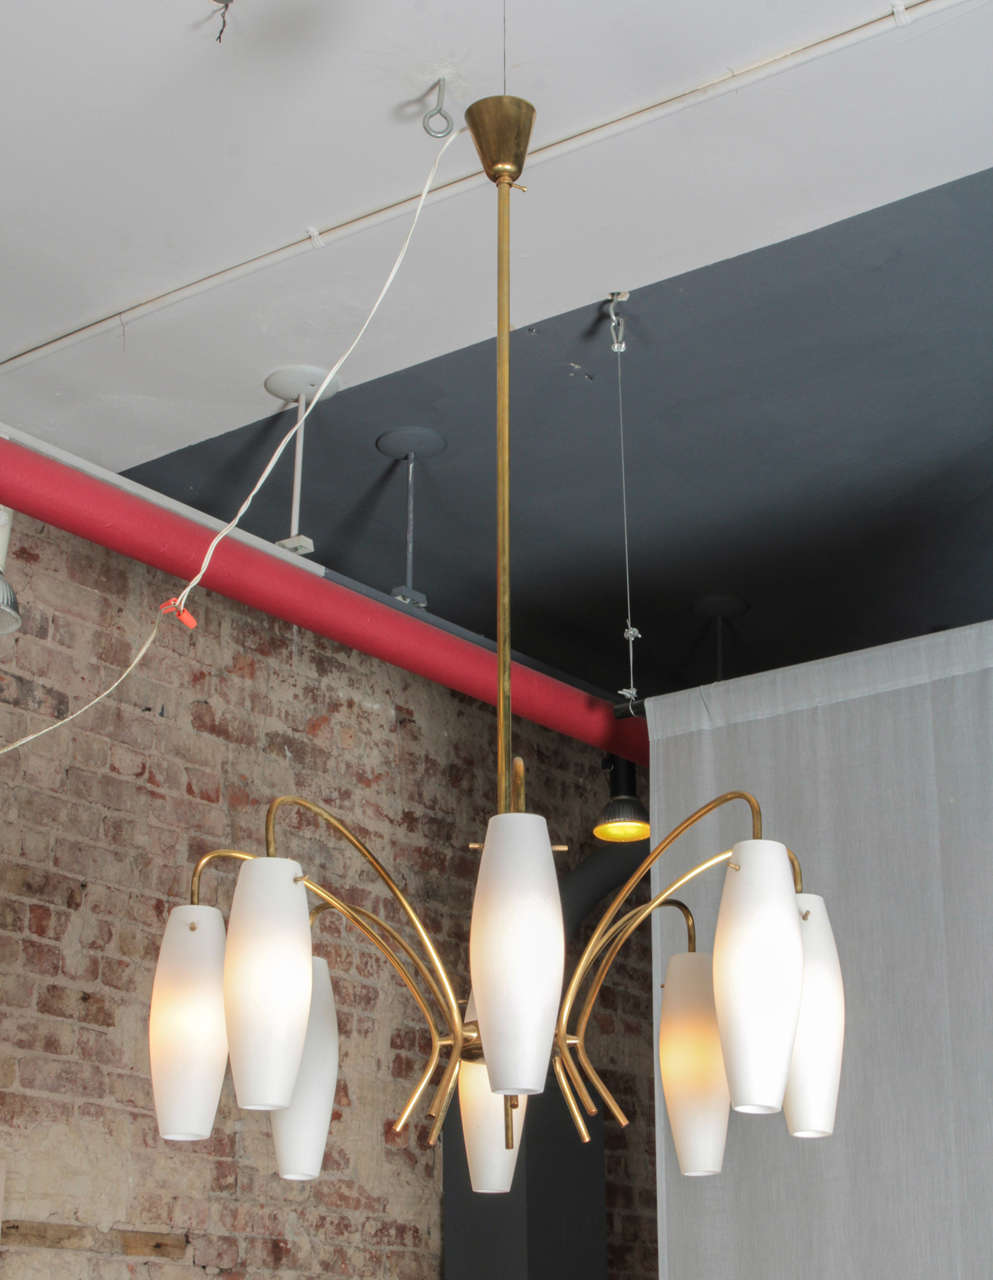 Simple and elegant Italian chandelier from the 1950s - full brass corpus matched with 8x suspended milk glass diffusers.